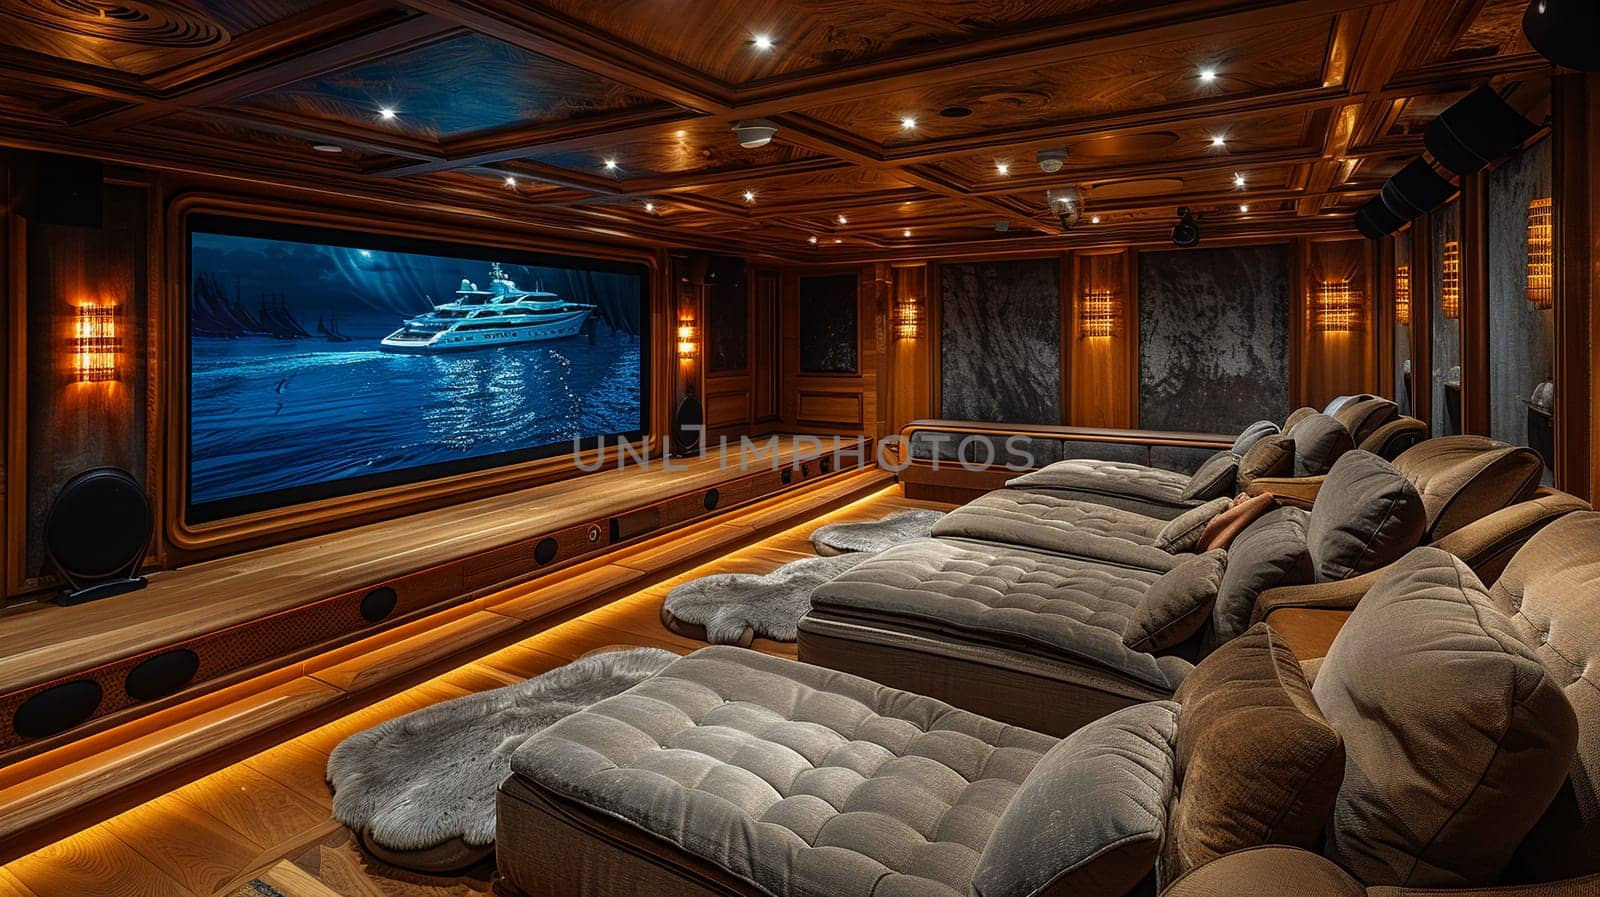 Luxurious home theater with plush seating and state-of-the-art sound systemup32K HD